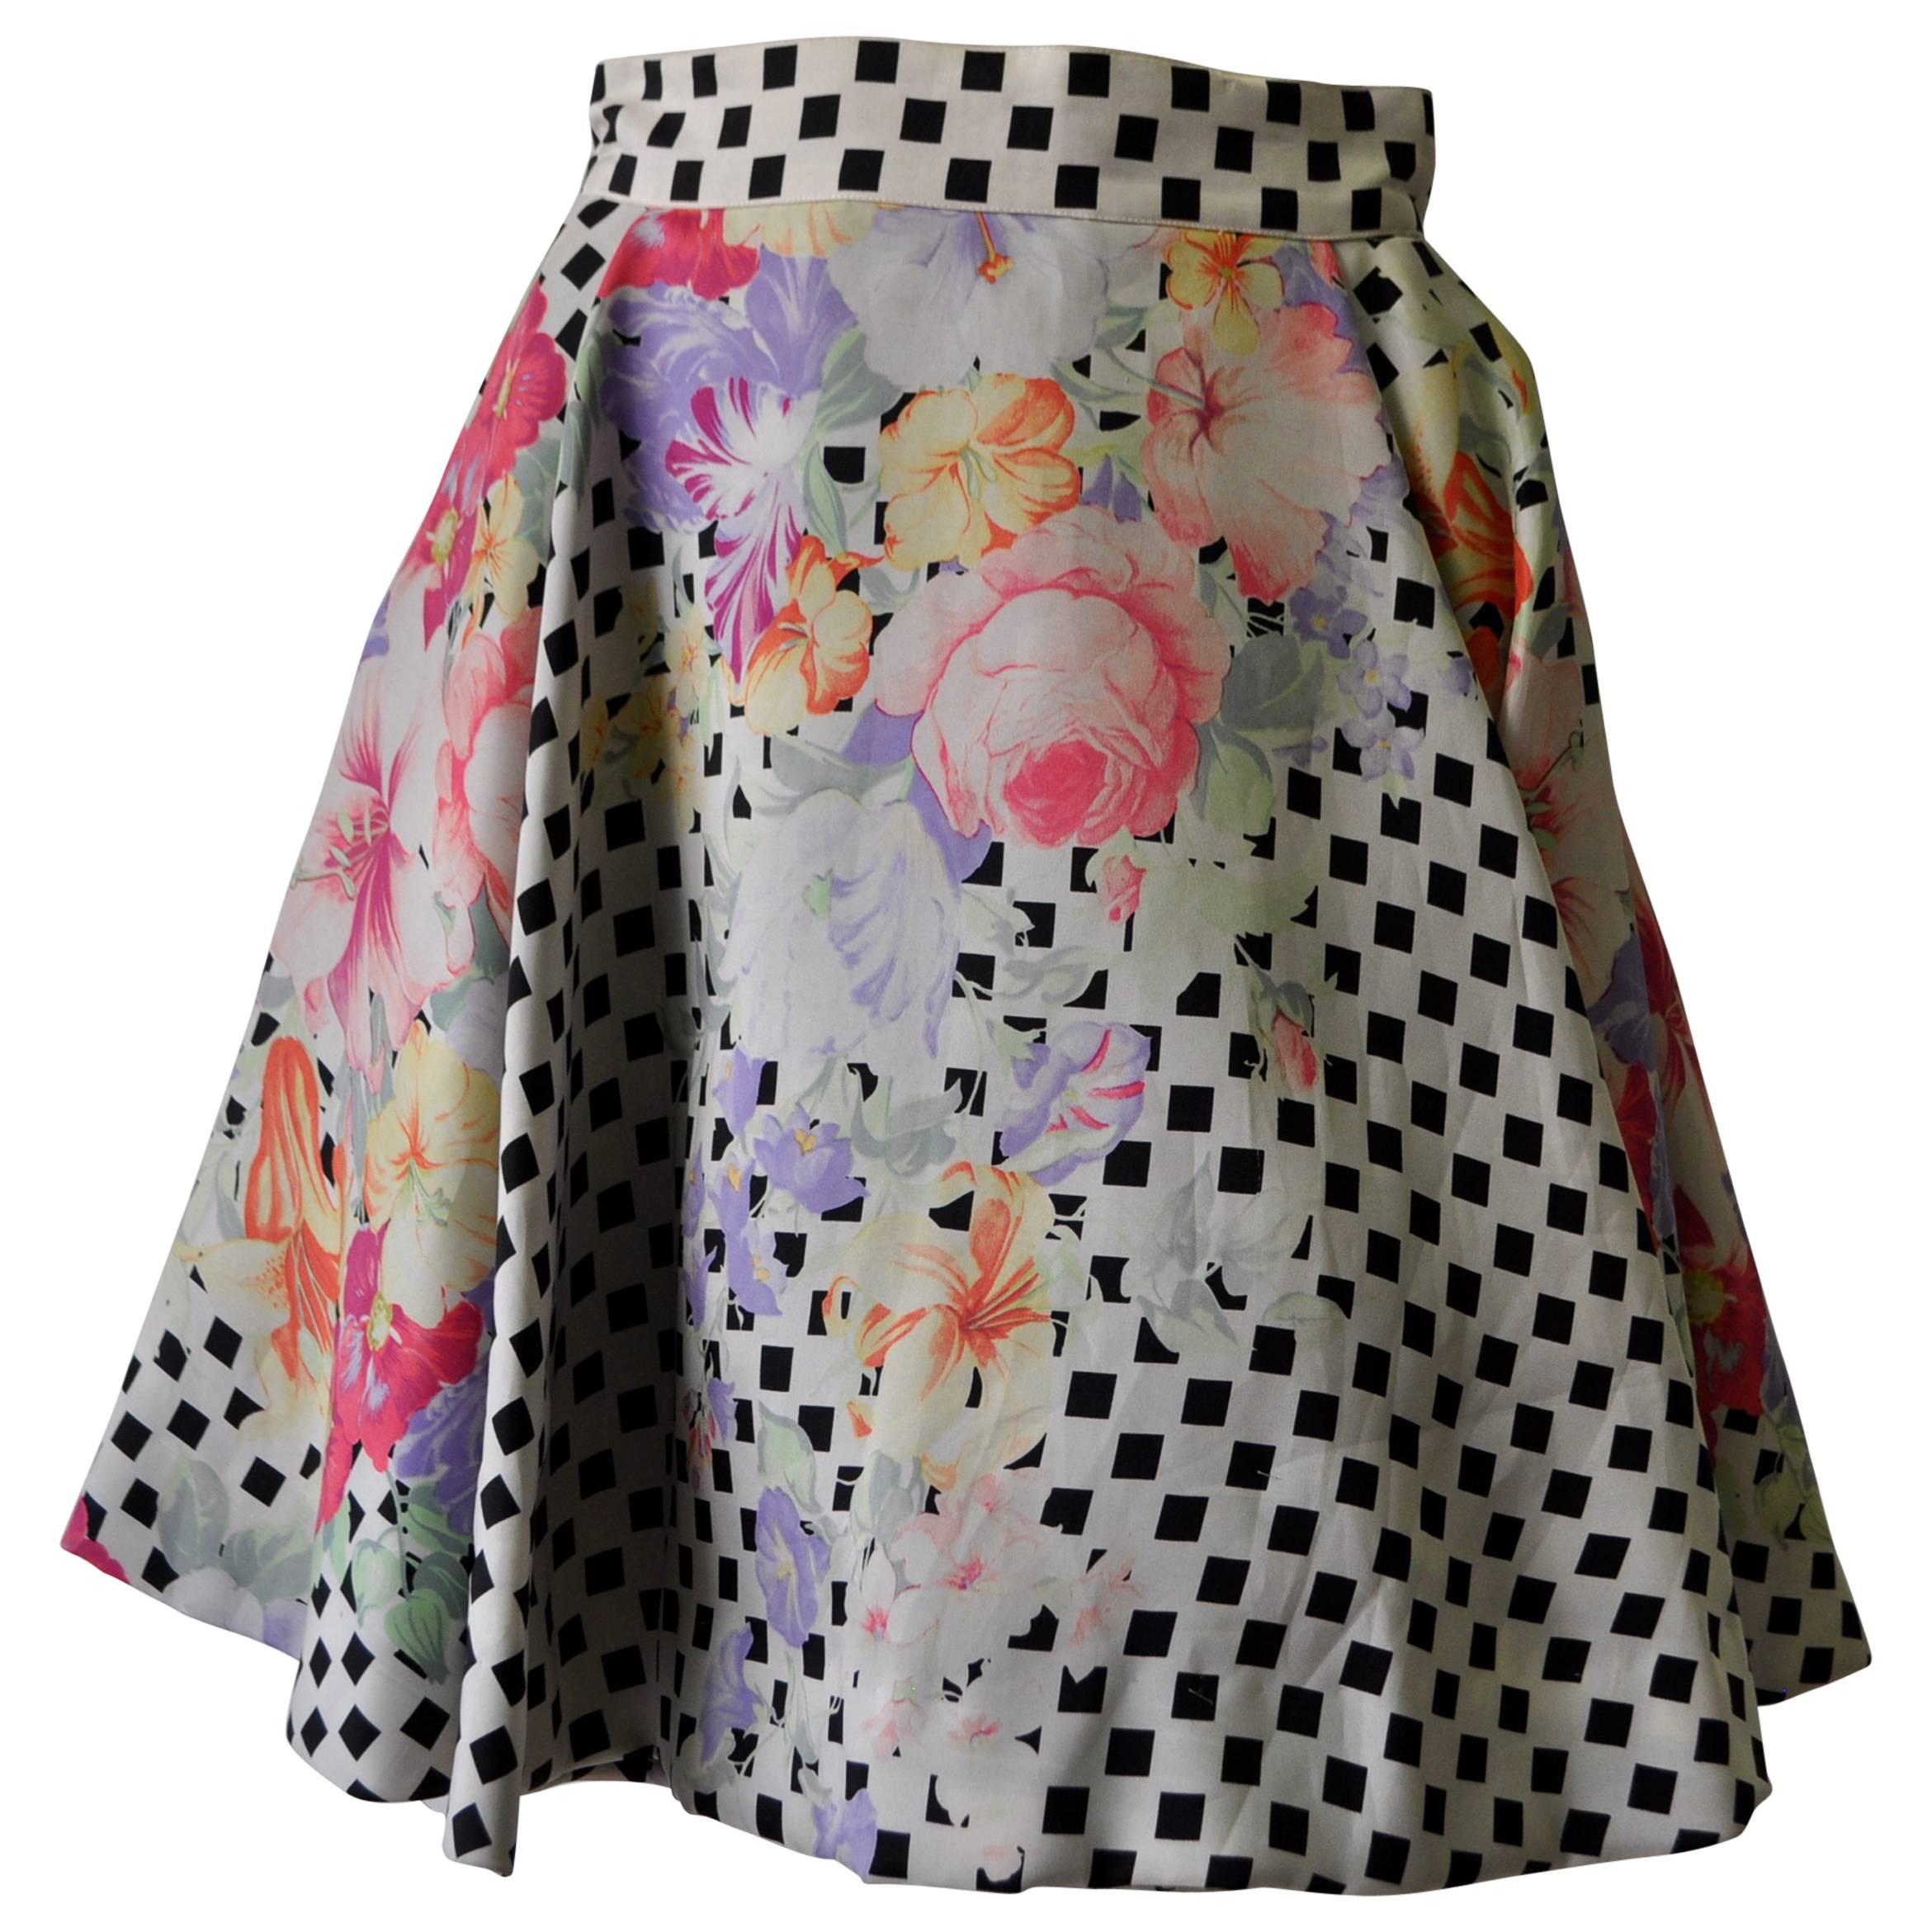 Extremely Rare Gianni Versace Couture Floral Check Print Silk Flare Skirt For Sale